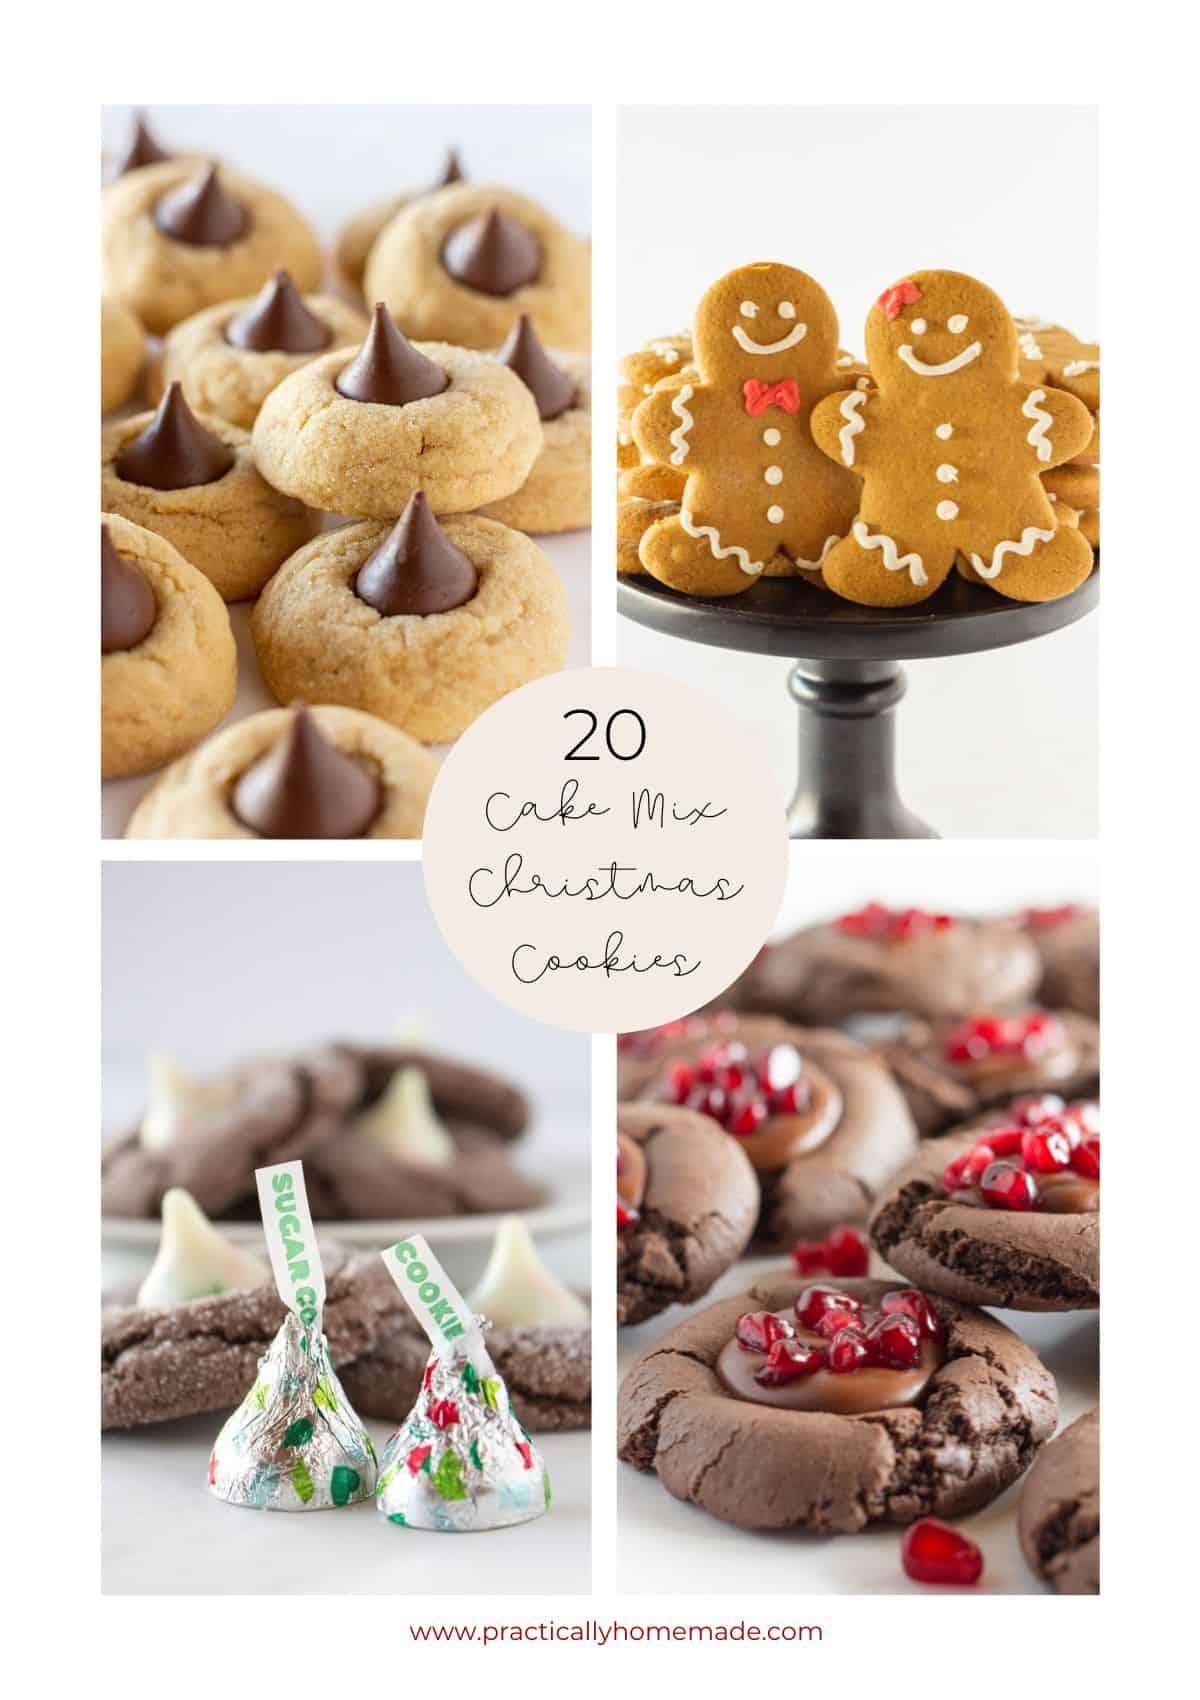 A collage of cake mix Christmas Cookies.